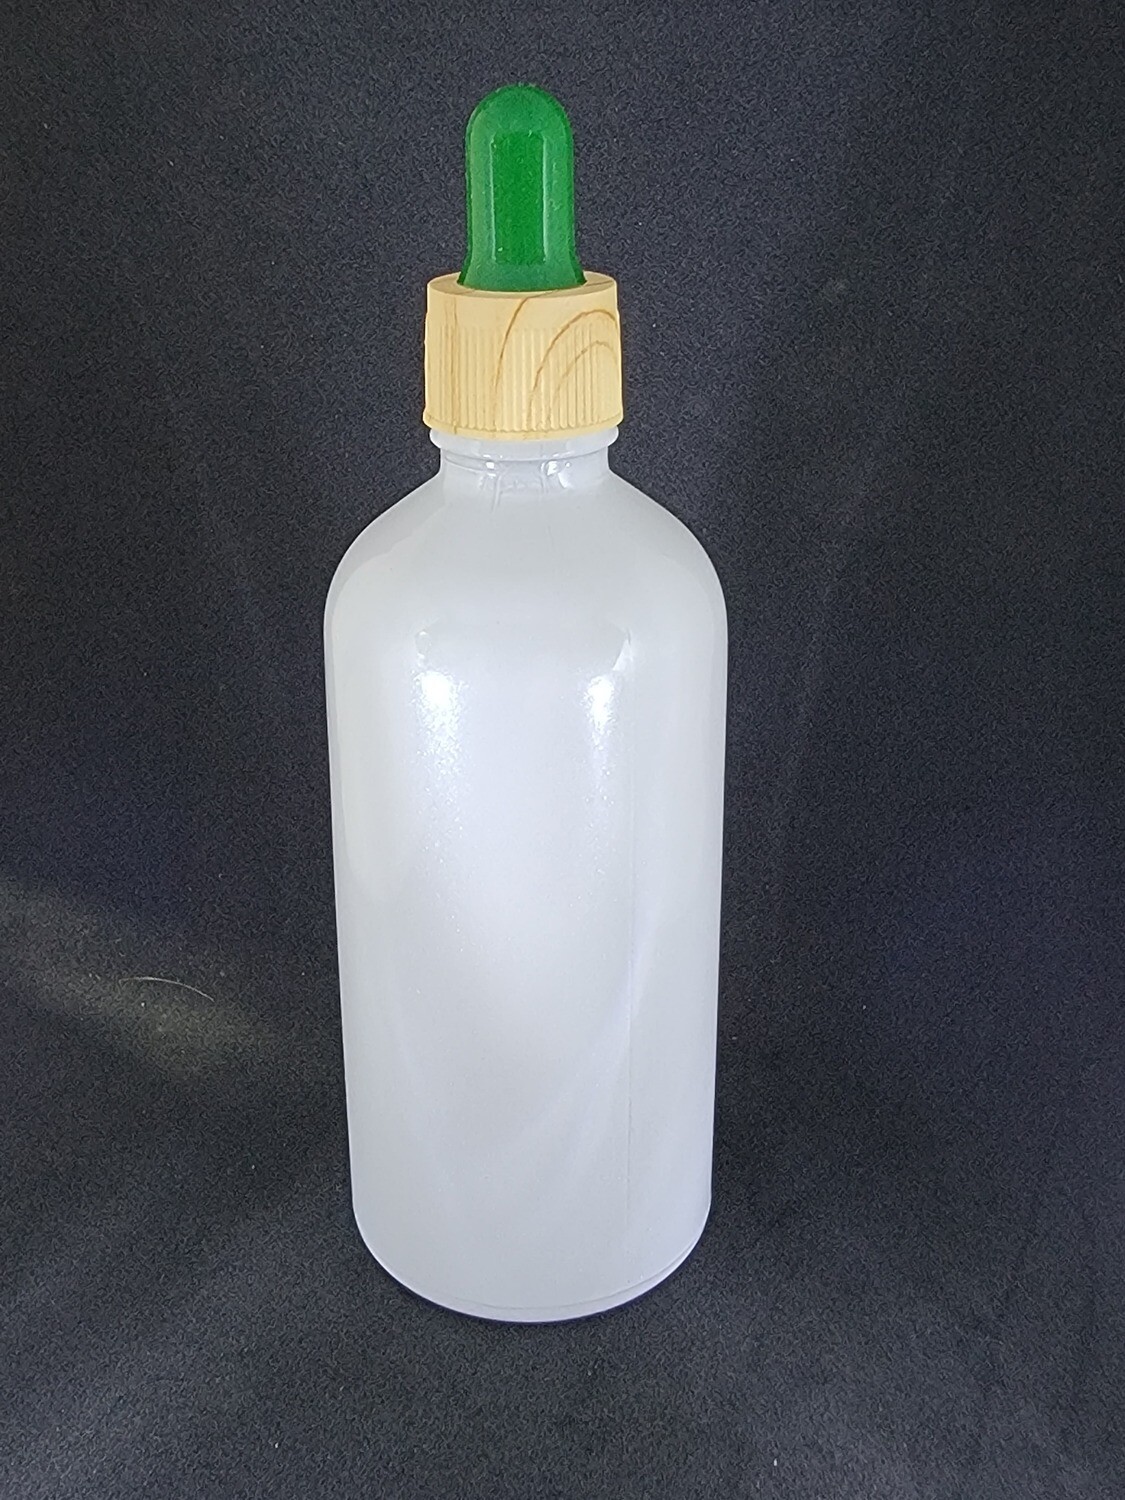 100mL WHITE PEARL (Coated) glass dropper bottle with GREEN TEAT & IMITATION RIDGED SIDE TIMBER CAP - SINGLE BUY